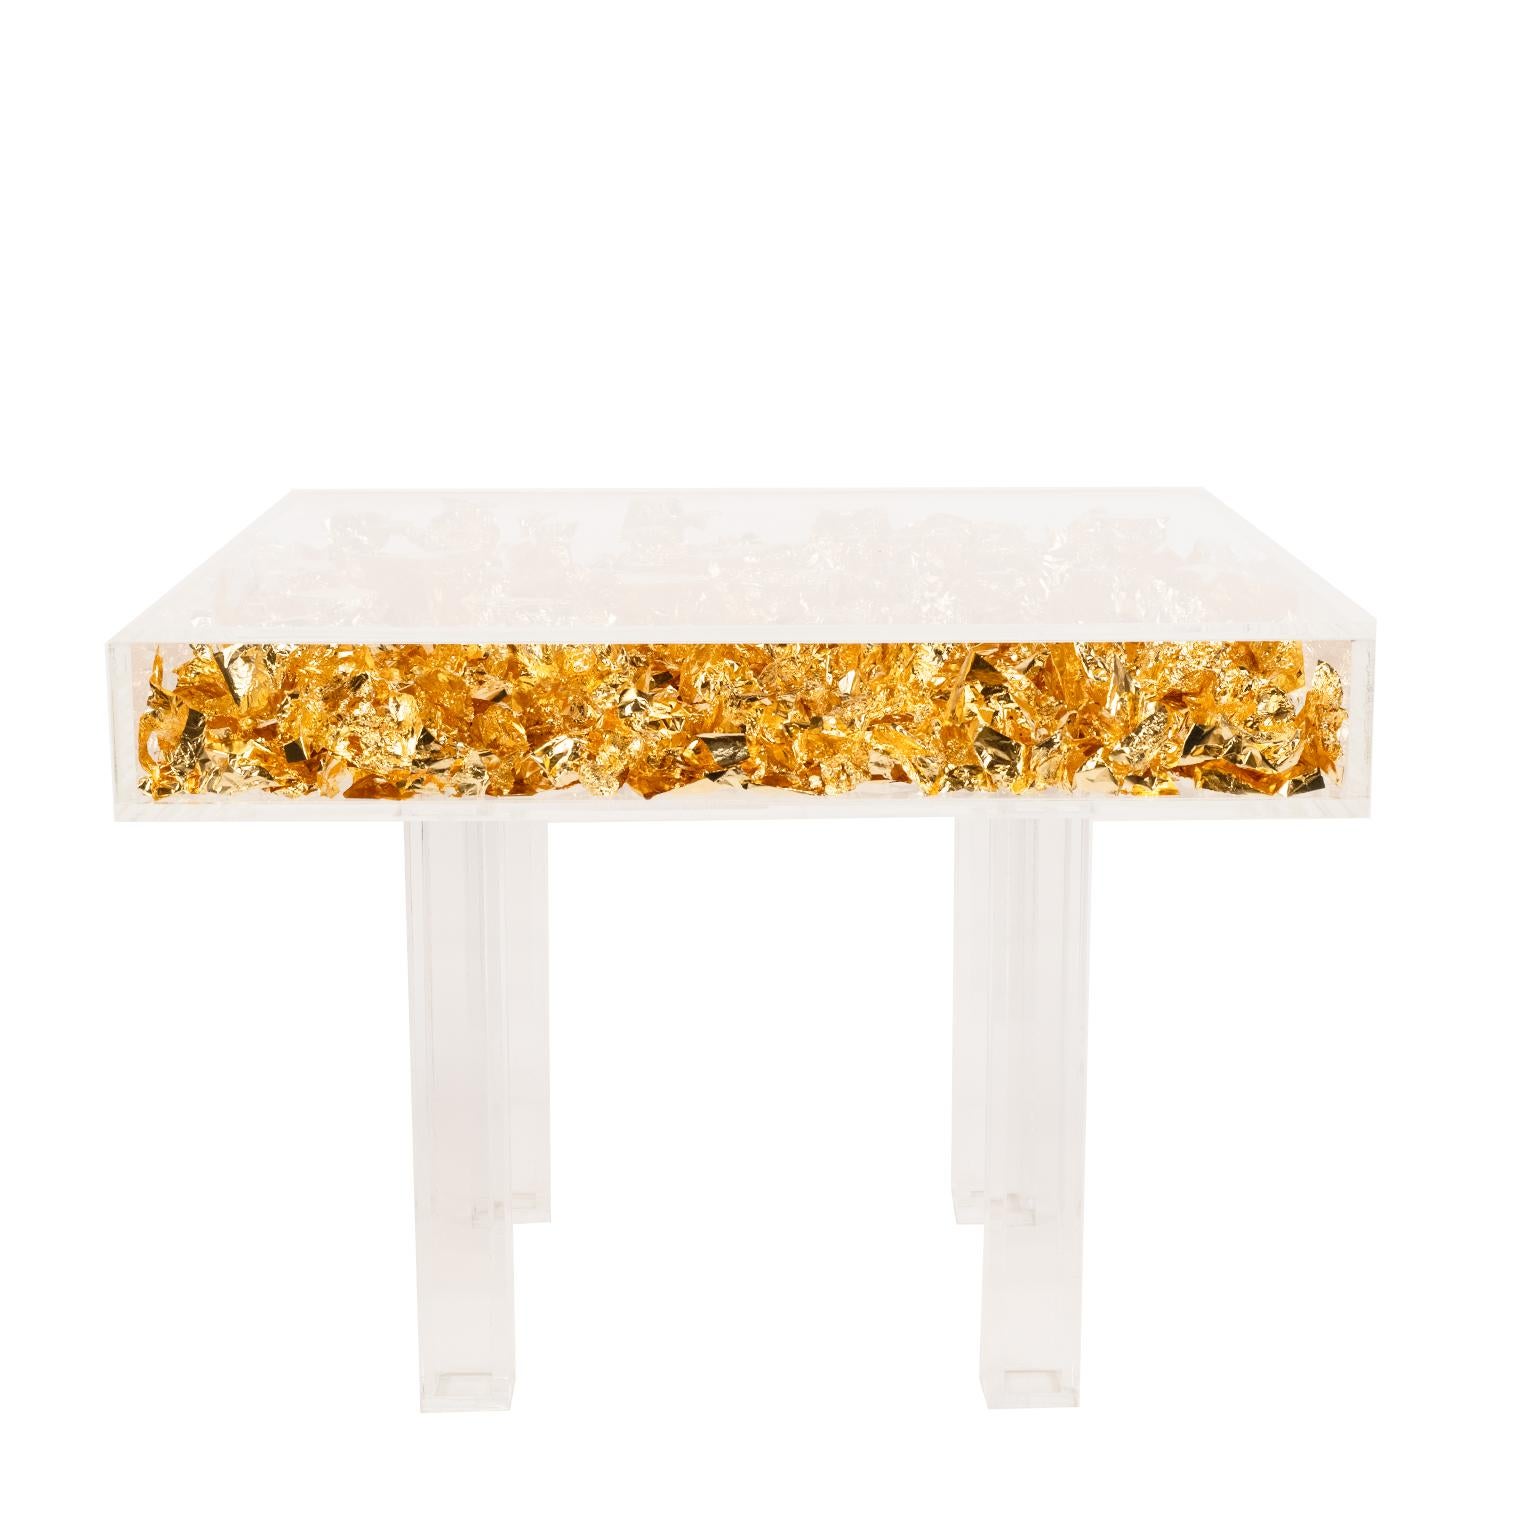 This fun and glamorous design of an all acrylic table is reminiscent of Yves Klein's  iconic Monogold coffee table from 1961. At present it is made with plexiglass legs and top, and filled with 